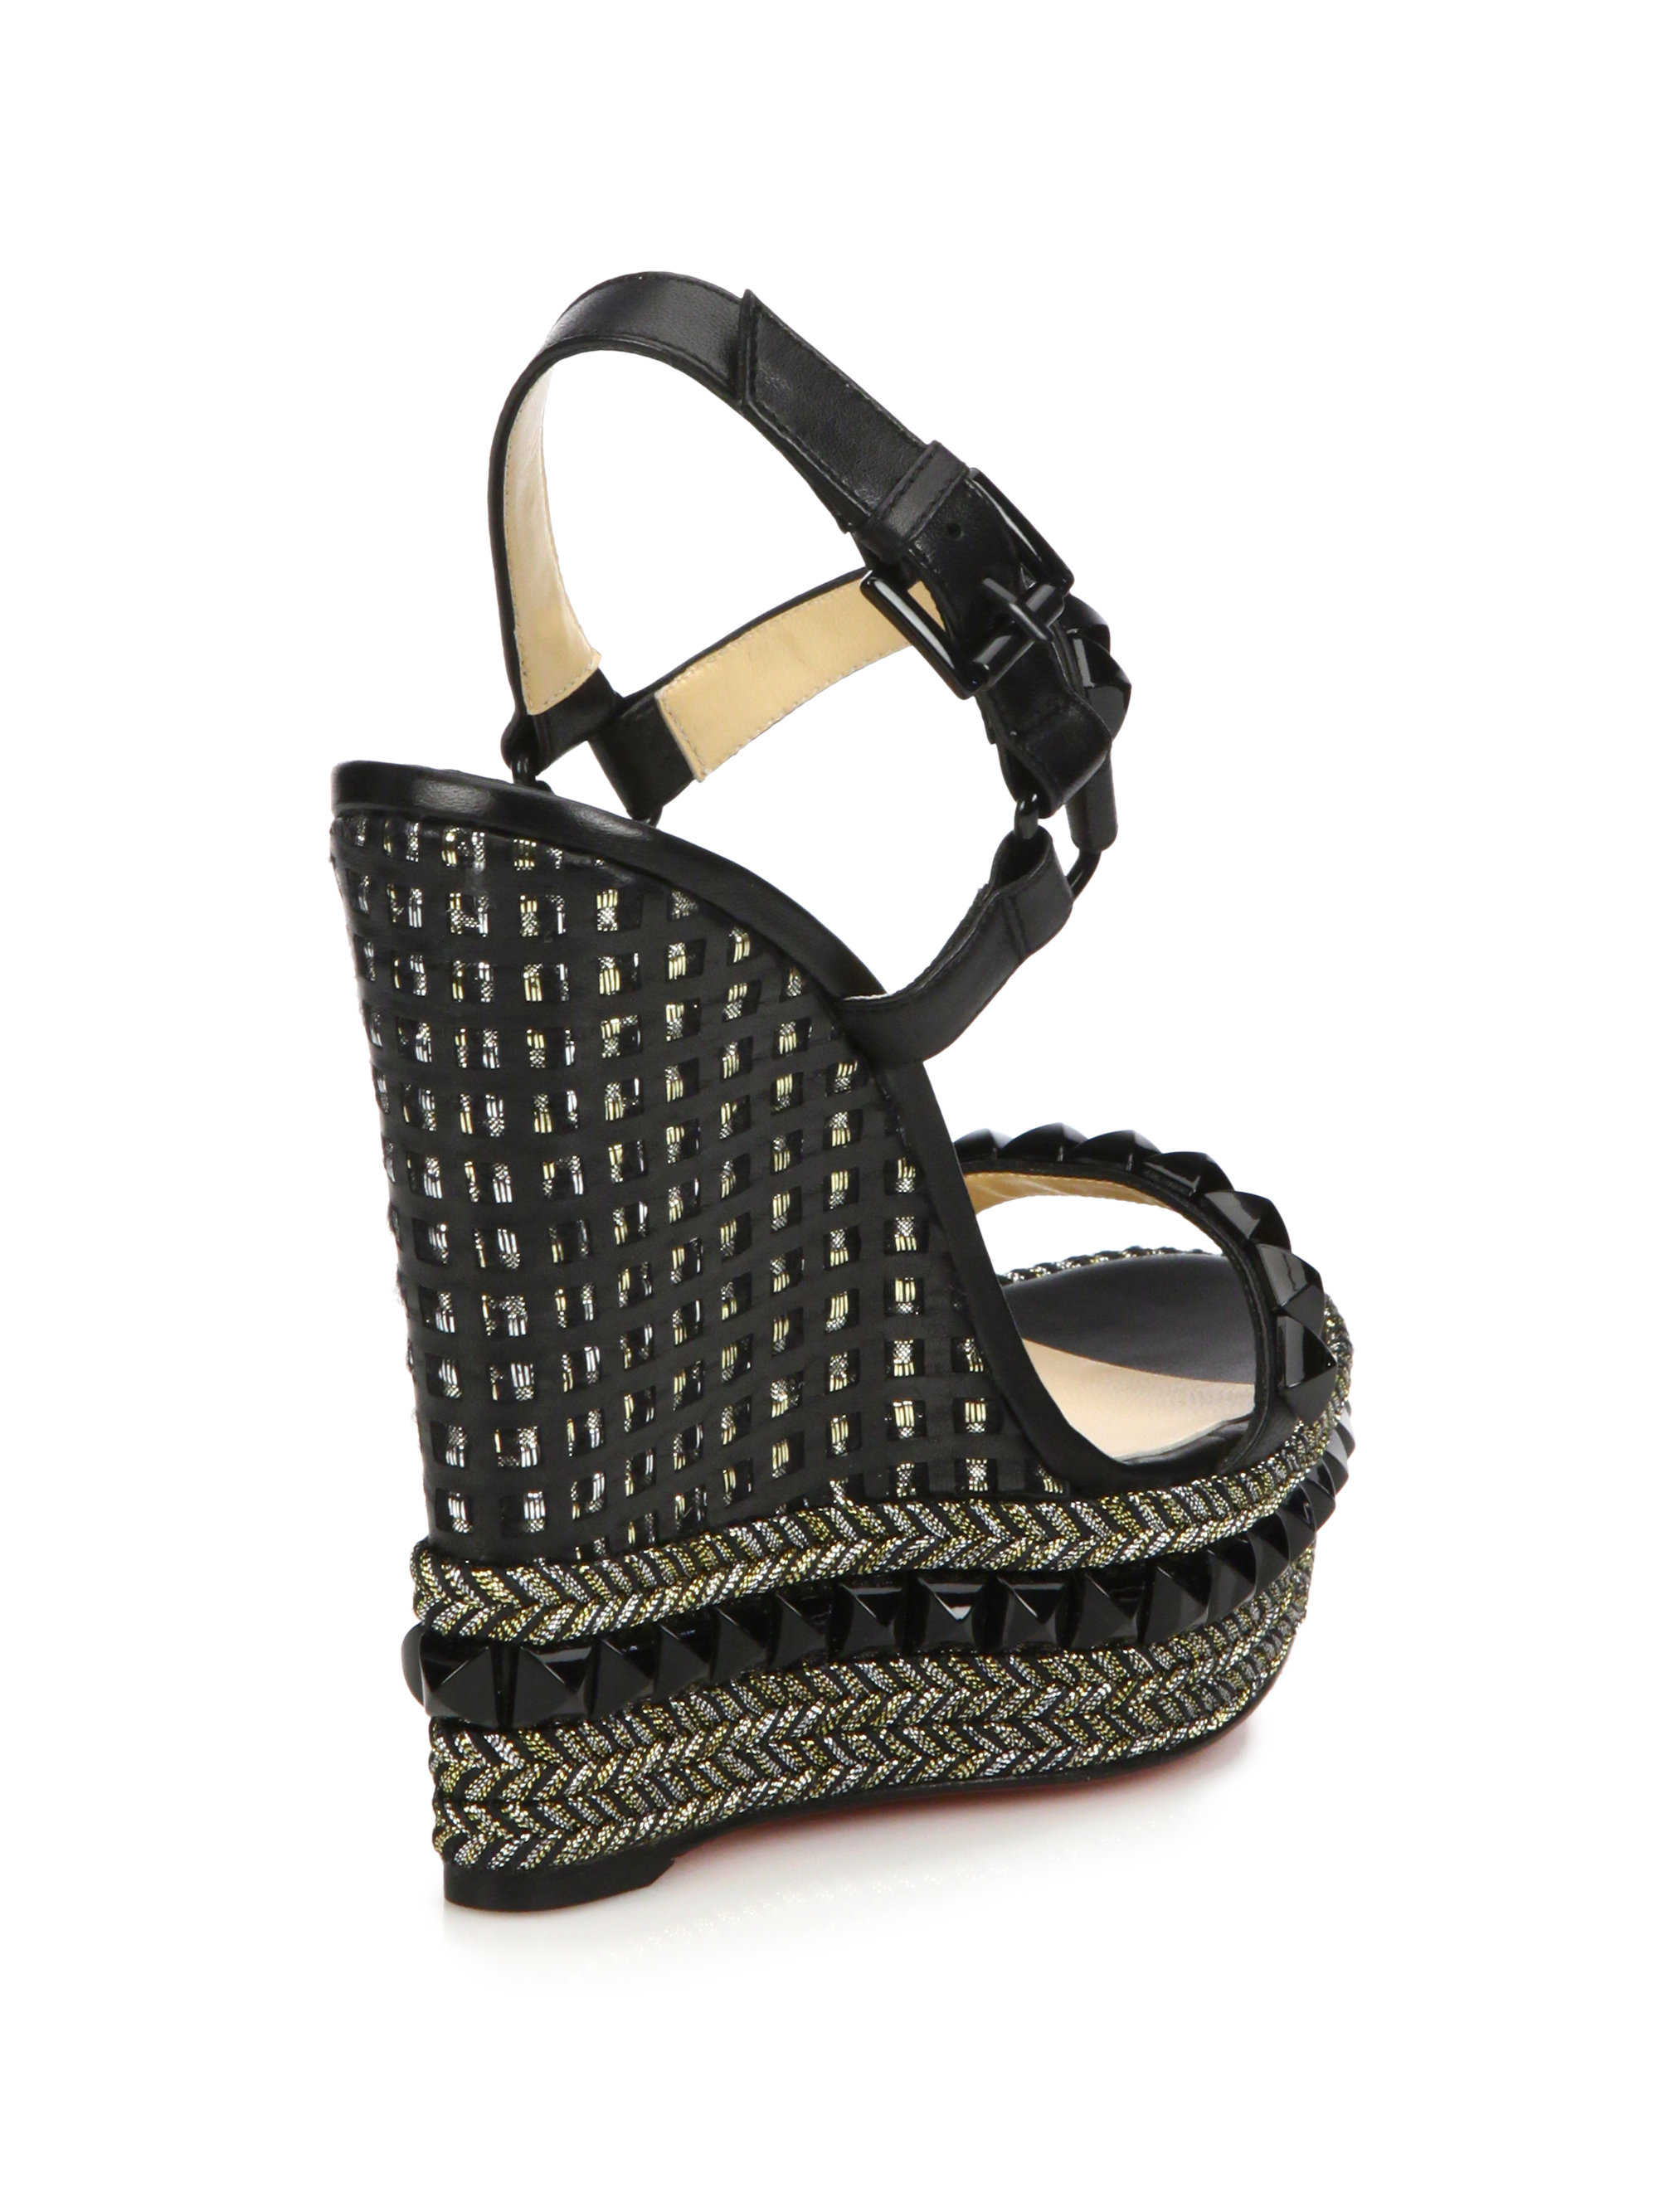 Christian Louboutin Cataclou Studded Red Sole Wedge Sandal in Black | Lyst